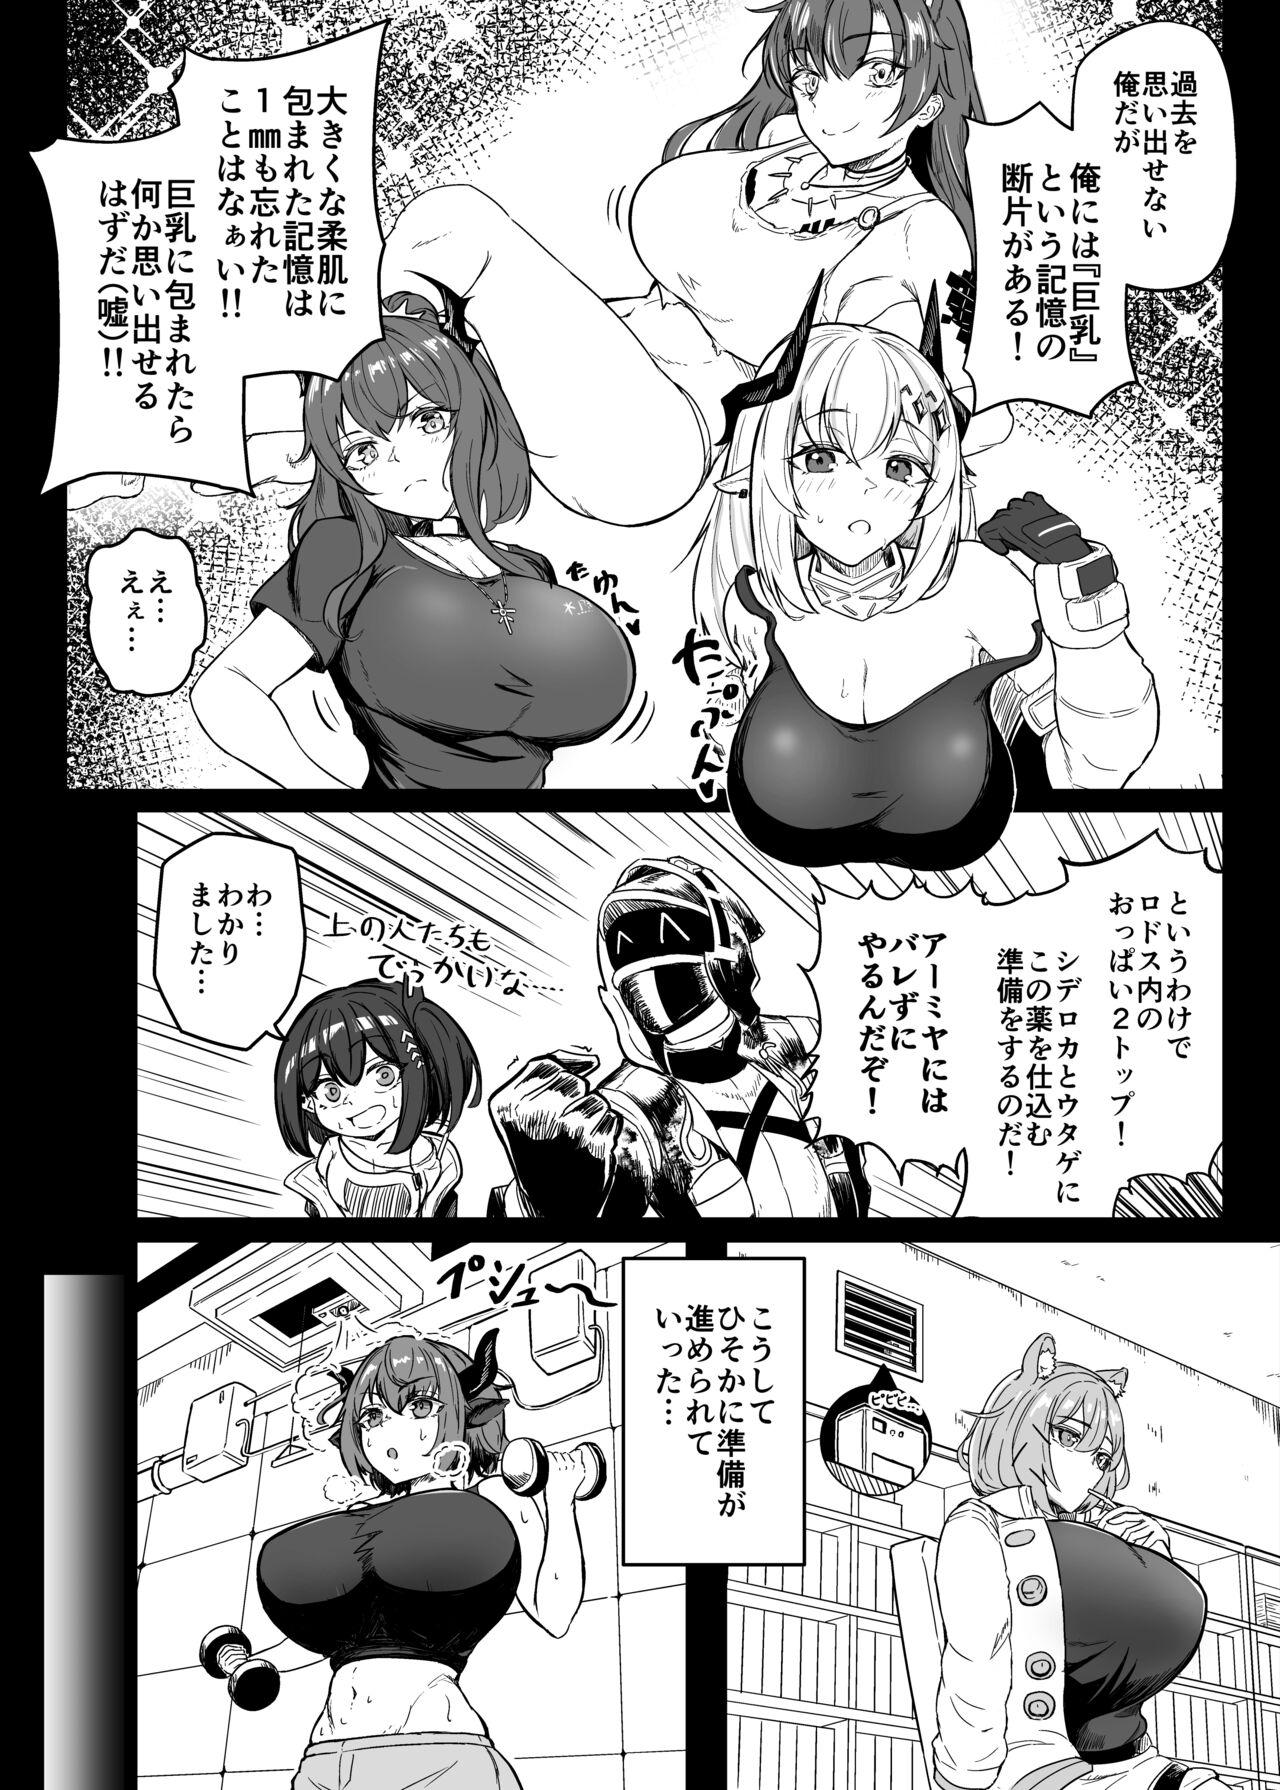 Oldyoung 巨乳契约 - Arknights Swallowing - Page 4